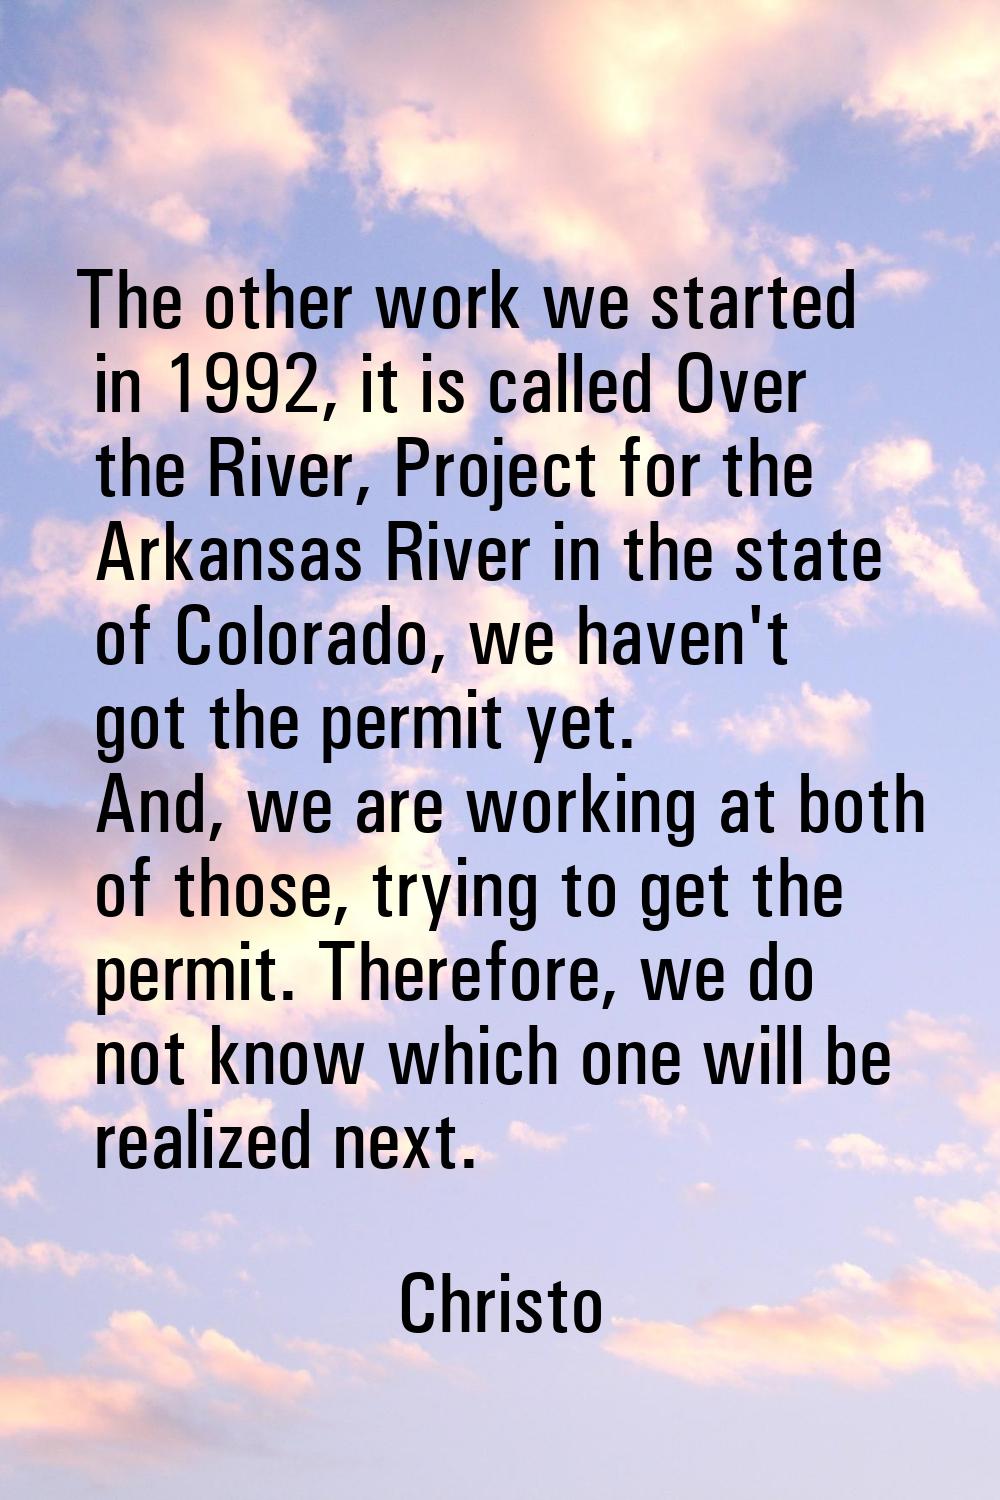 The other work we started in 1992, it is called Over the River, Project for the Arkansas River in t